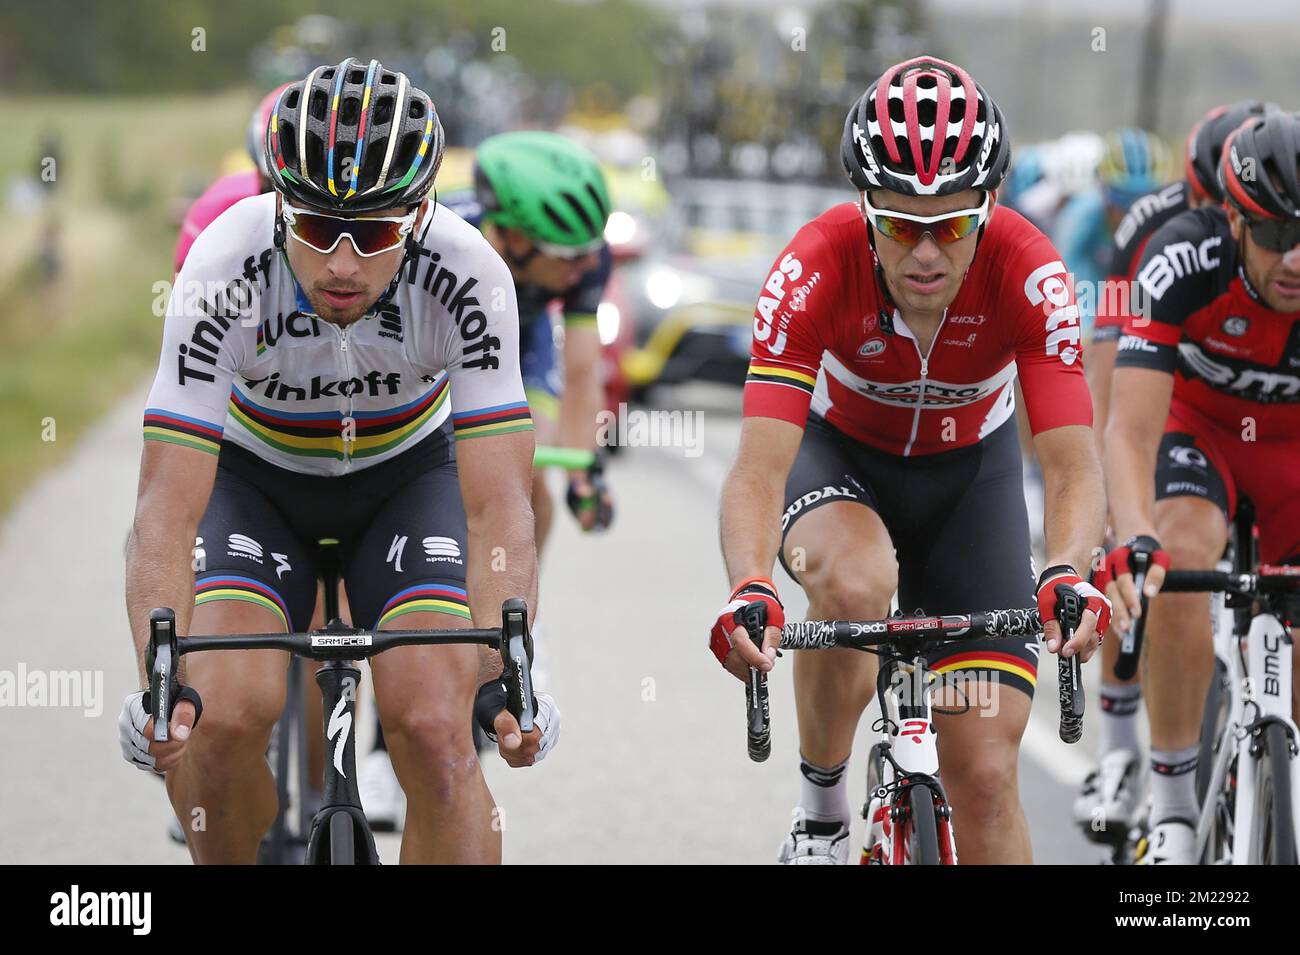 Slovakian Peter Sagan of Tinkoff and French Tony Gallopin of Lotto Soudal pictured in action during the tenth stage of the 103rd edition of the Tour de France cycling race, 197km from Escaldes-Engordany, Andorra to Revel, France on Tuesday 12 July 2016.  Stock Photo